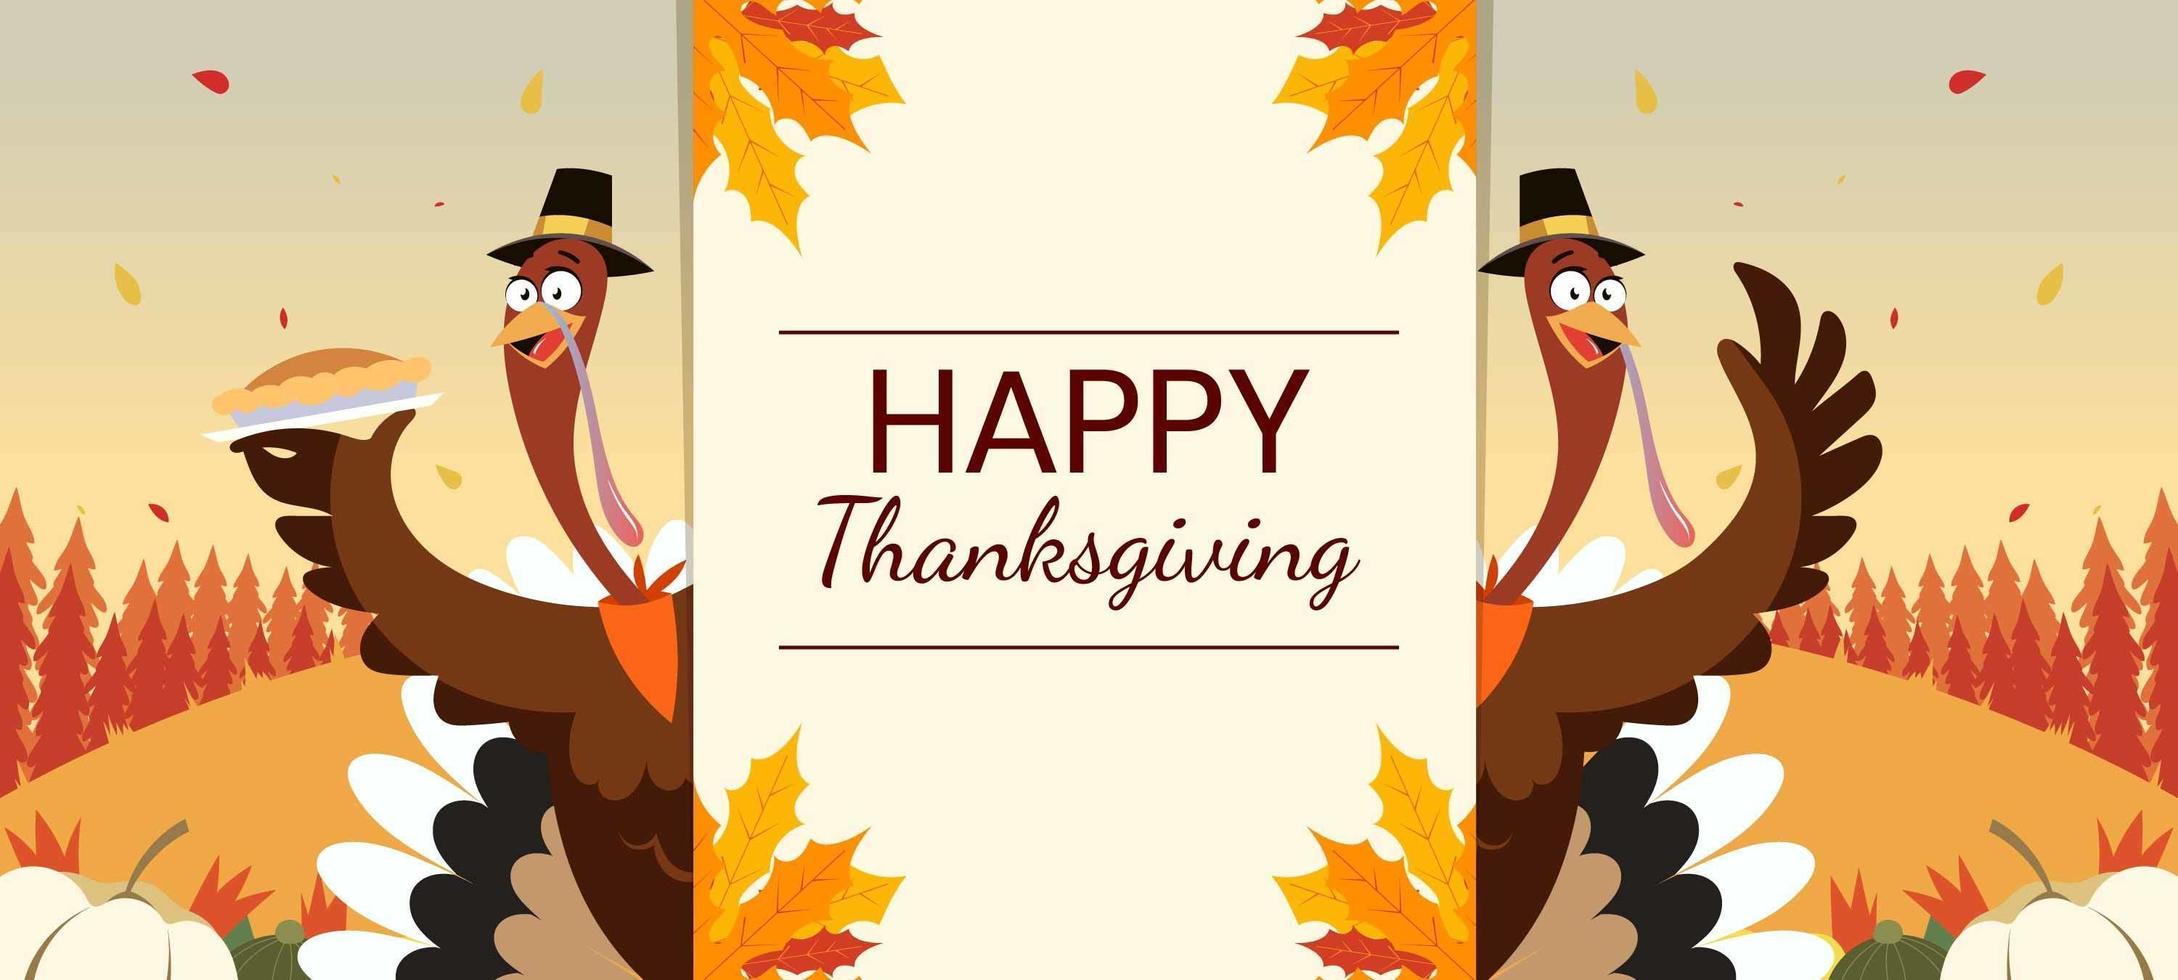 Happy Thanksgiving Celebration with Turkey and Pie vector